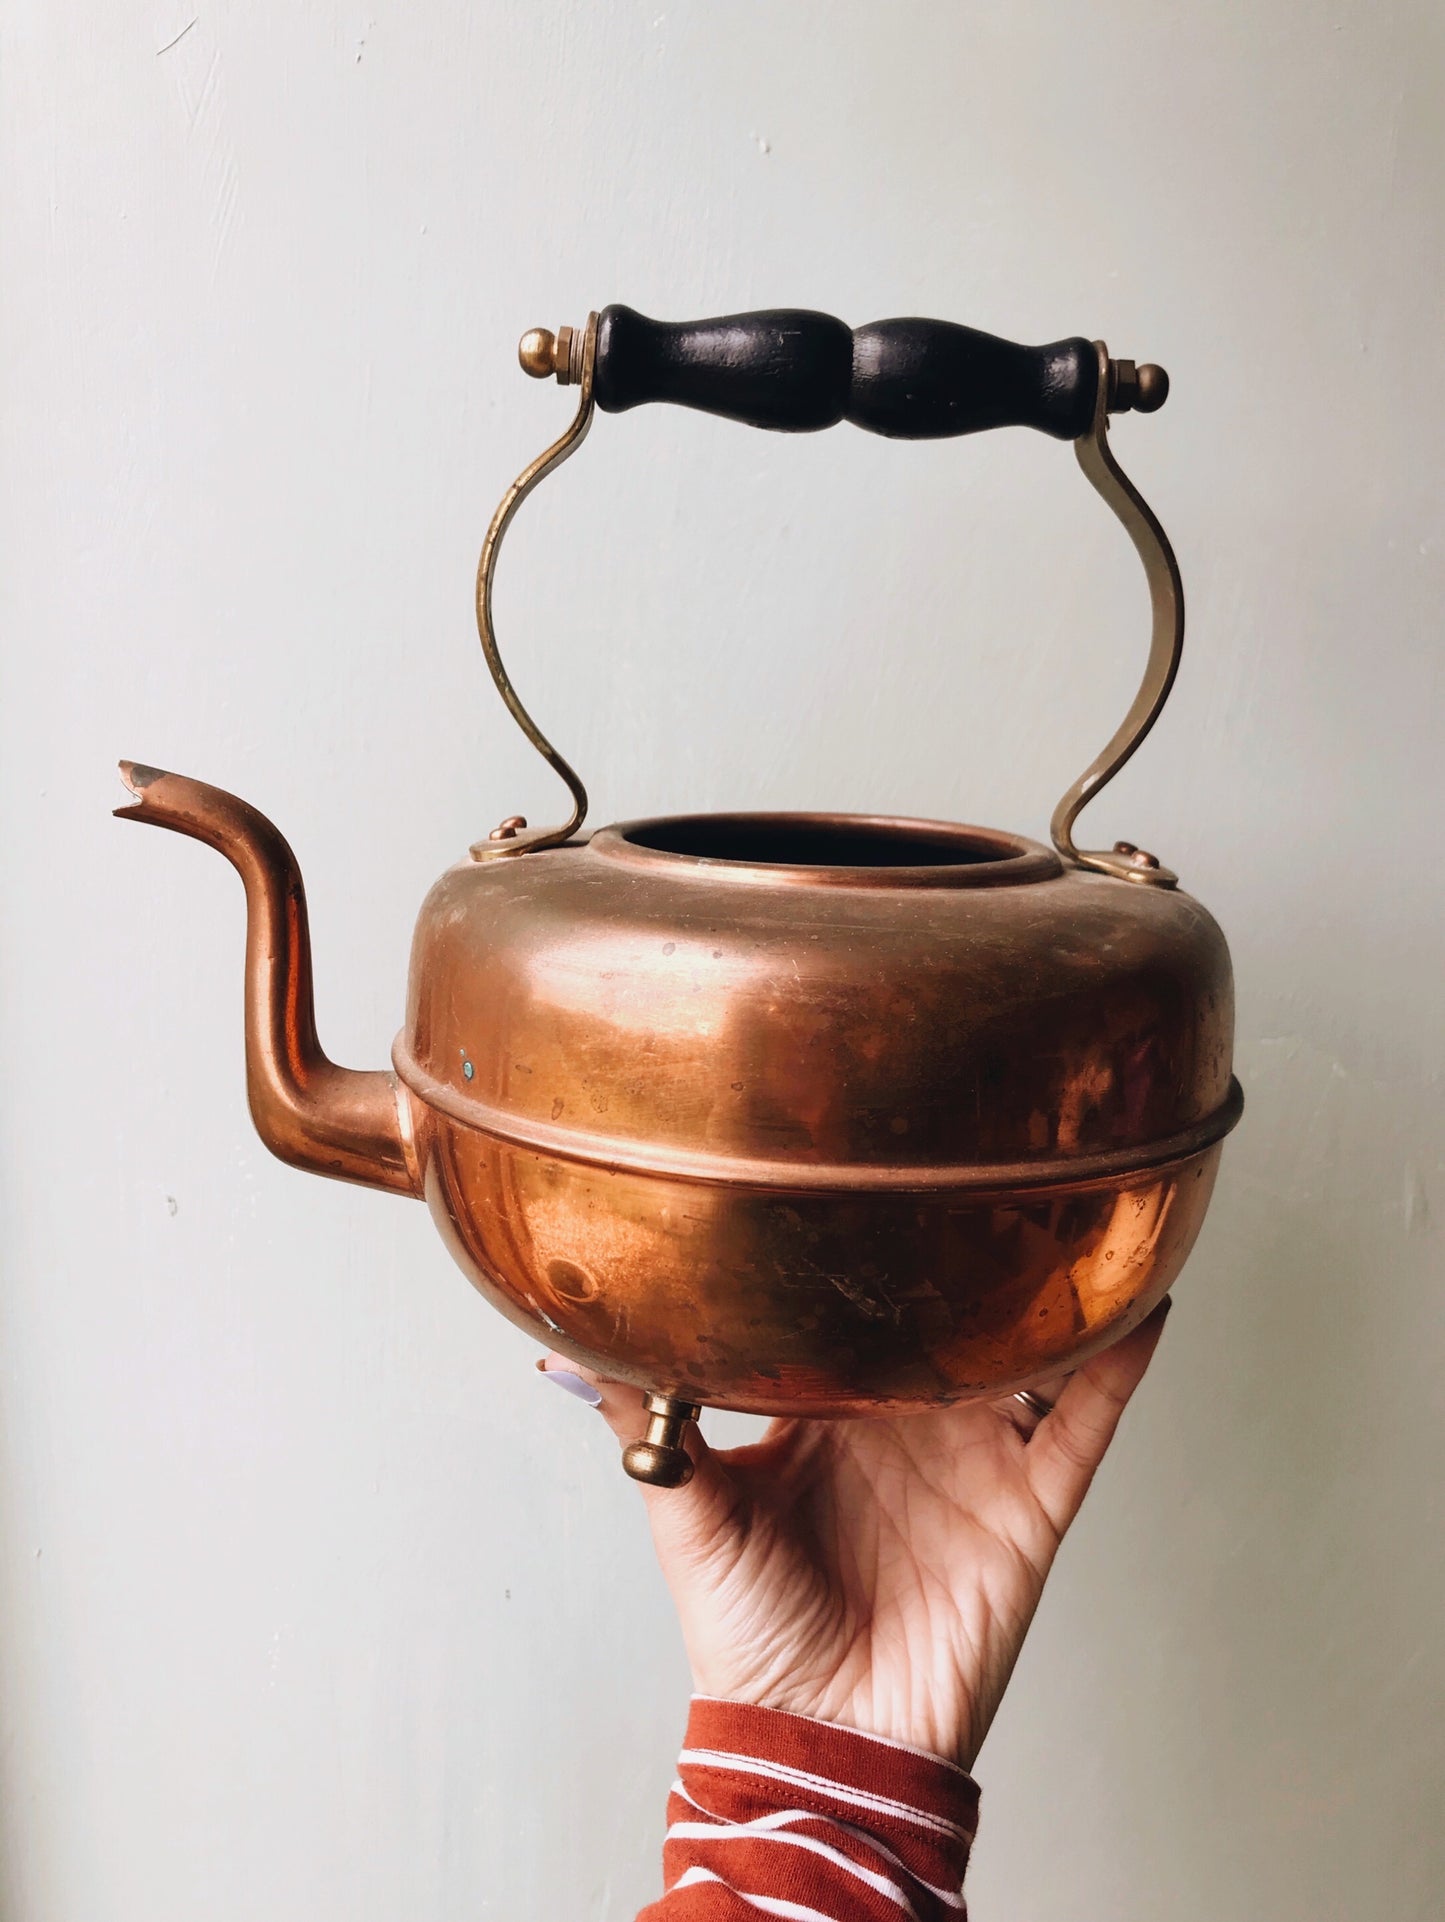 Vintage Copper & Brass Teapot with Wooden Handle (no lid) - Stone & Sage 